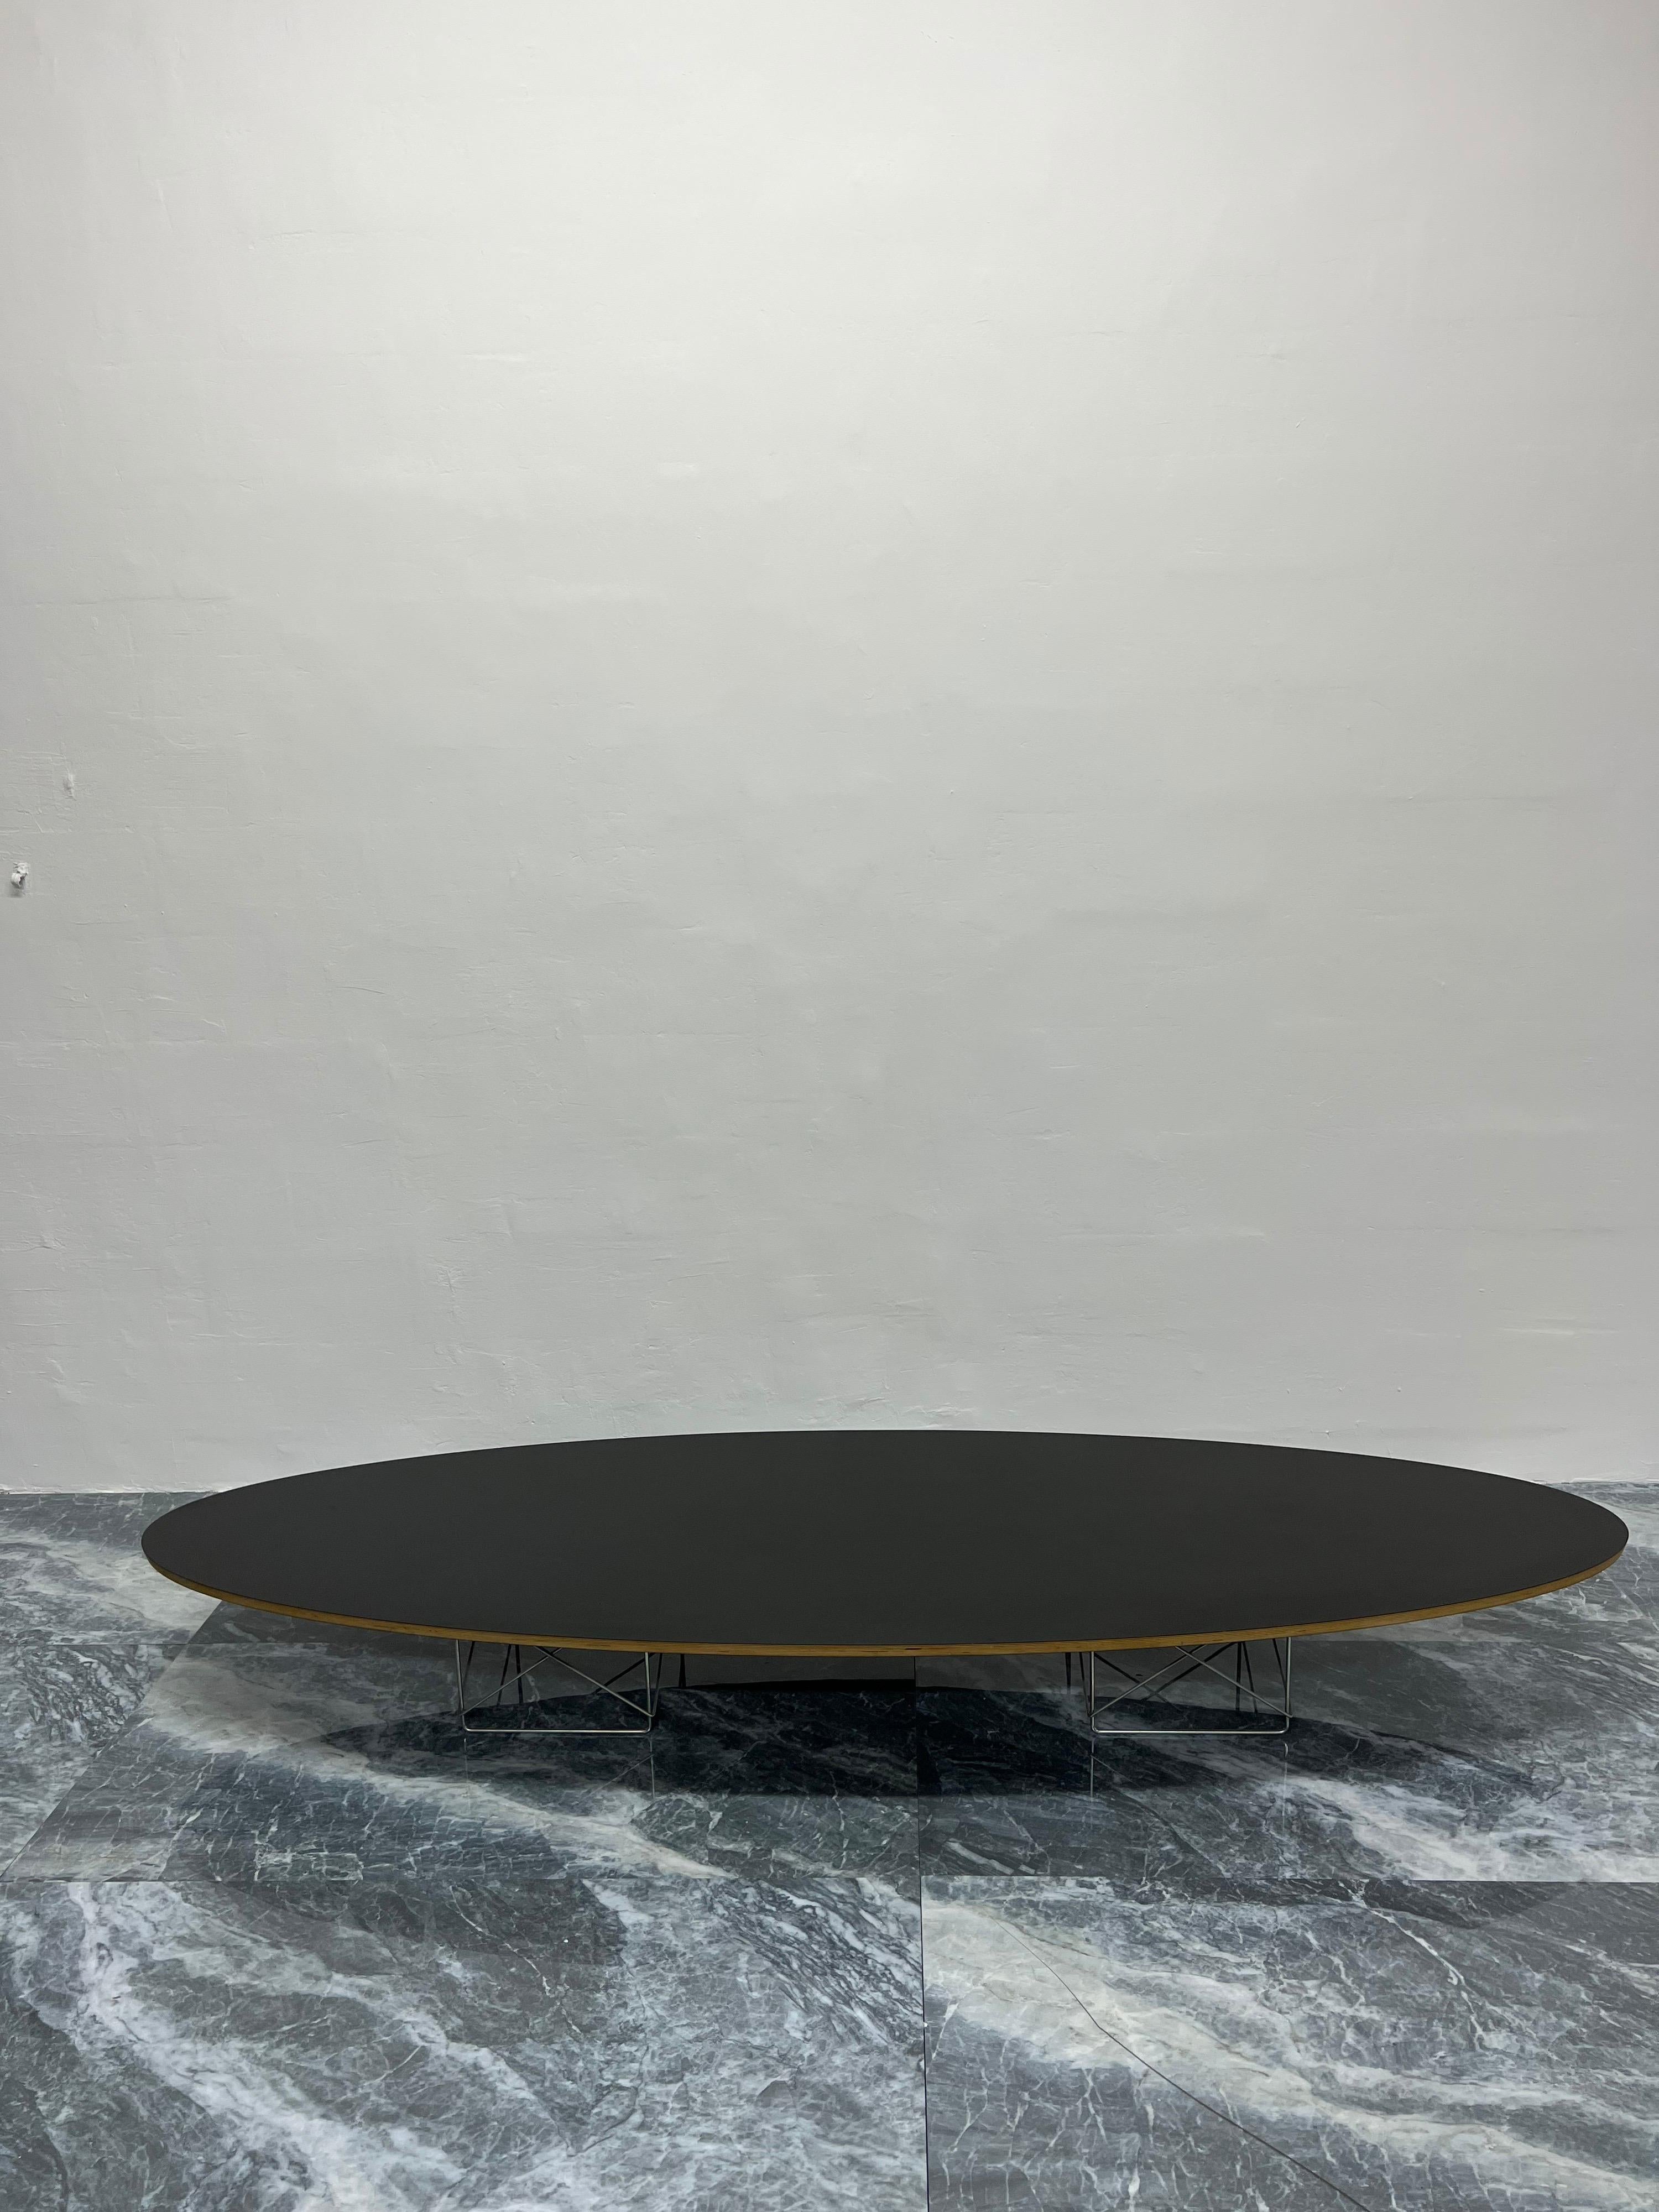 Black laminate top on steel wire frame base Eliptical coffee table designed by Charles and Ray Eames for Herman Miller. This version is from the late 1990s and maintains the Herman Miller Eames placard.

Nicknamed the “surfboard table,” the